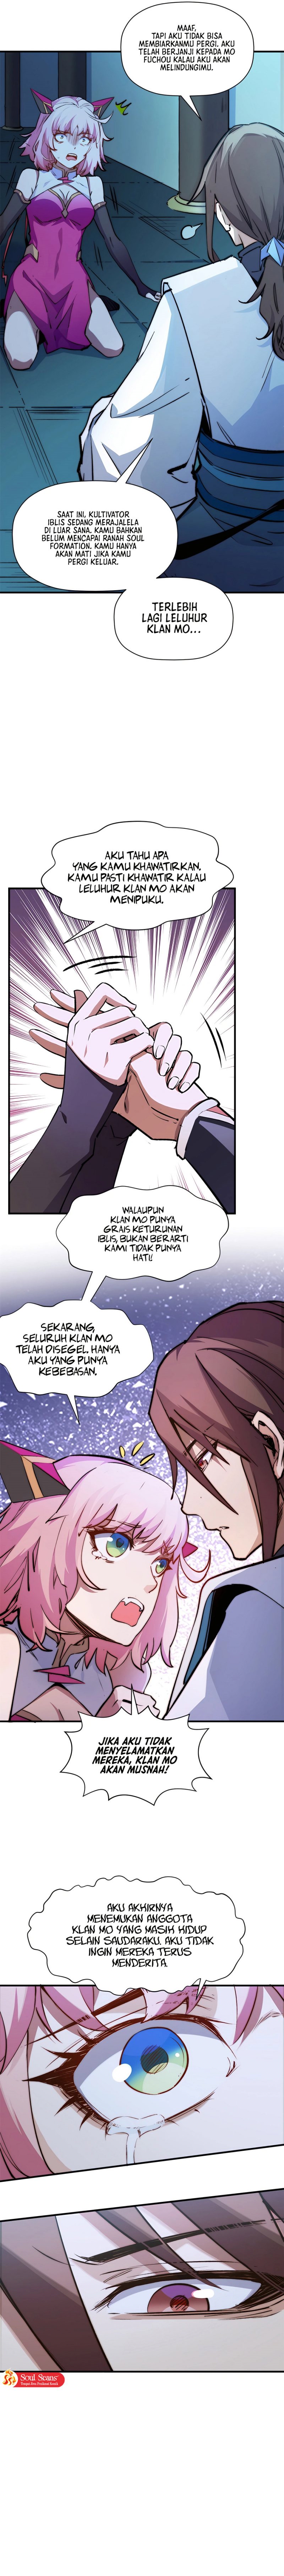 Dilarang COPAS - situs resmi www.mangacanblog.com - Komik top tier providence secretly cultivate for a thousand years 135 - chapter 135 136 Indonesia top tier providence secretly cultivate for a thousand years 135 - chapter 135 Terbaru 5|Baca Manga Komik Indonesia|Mangacan